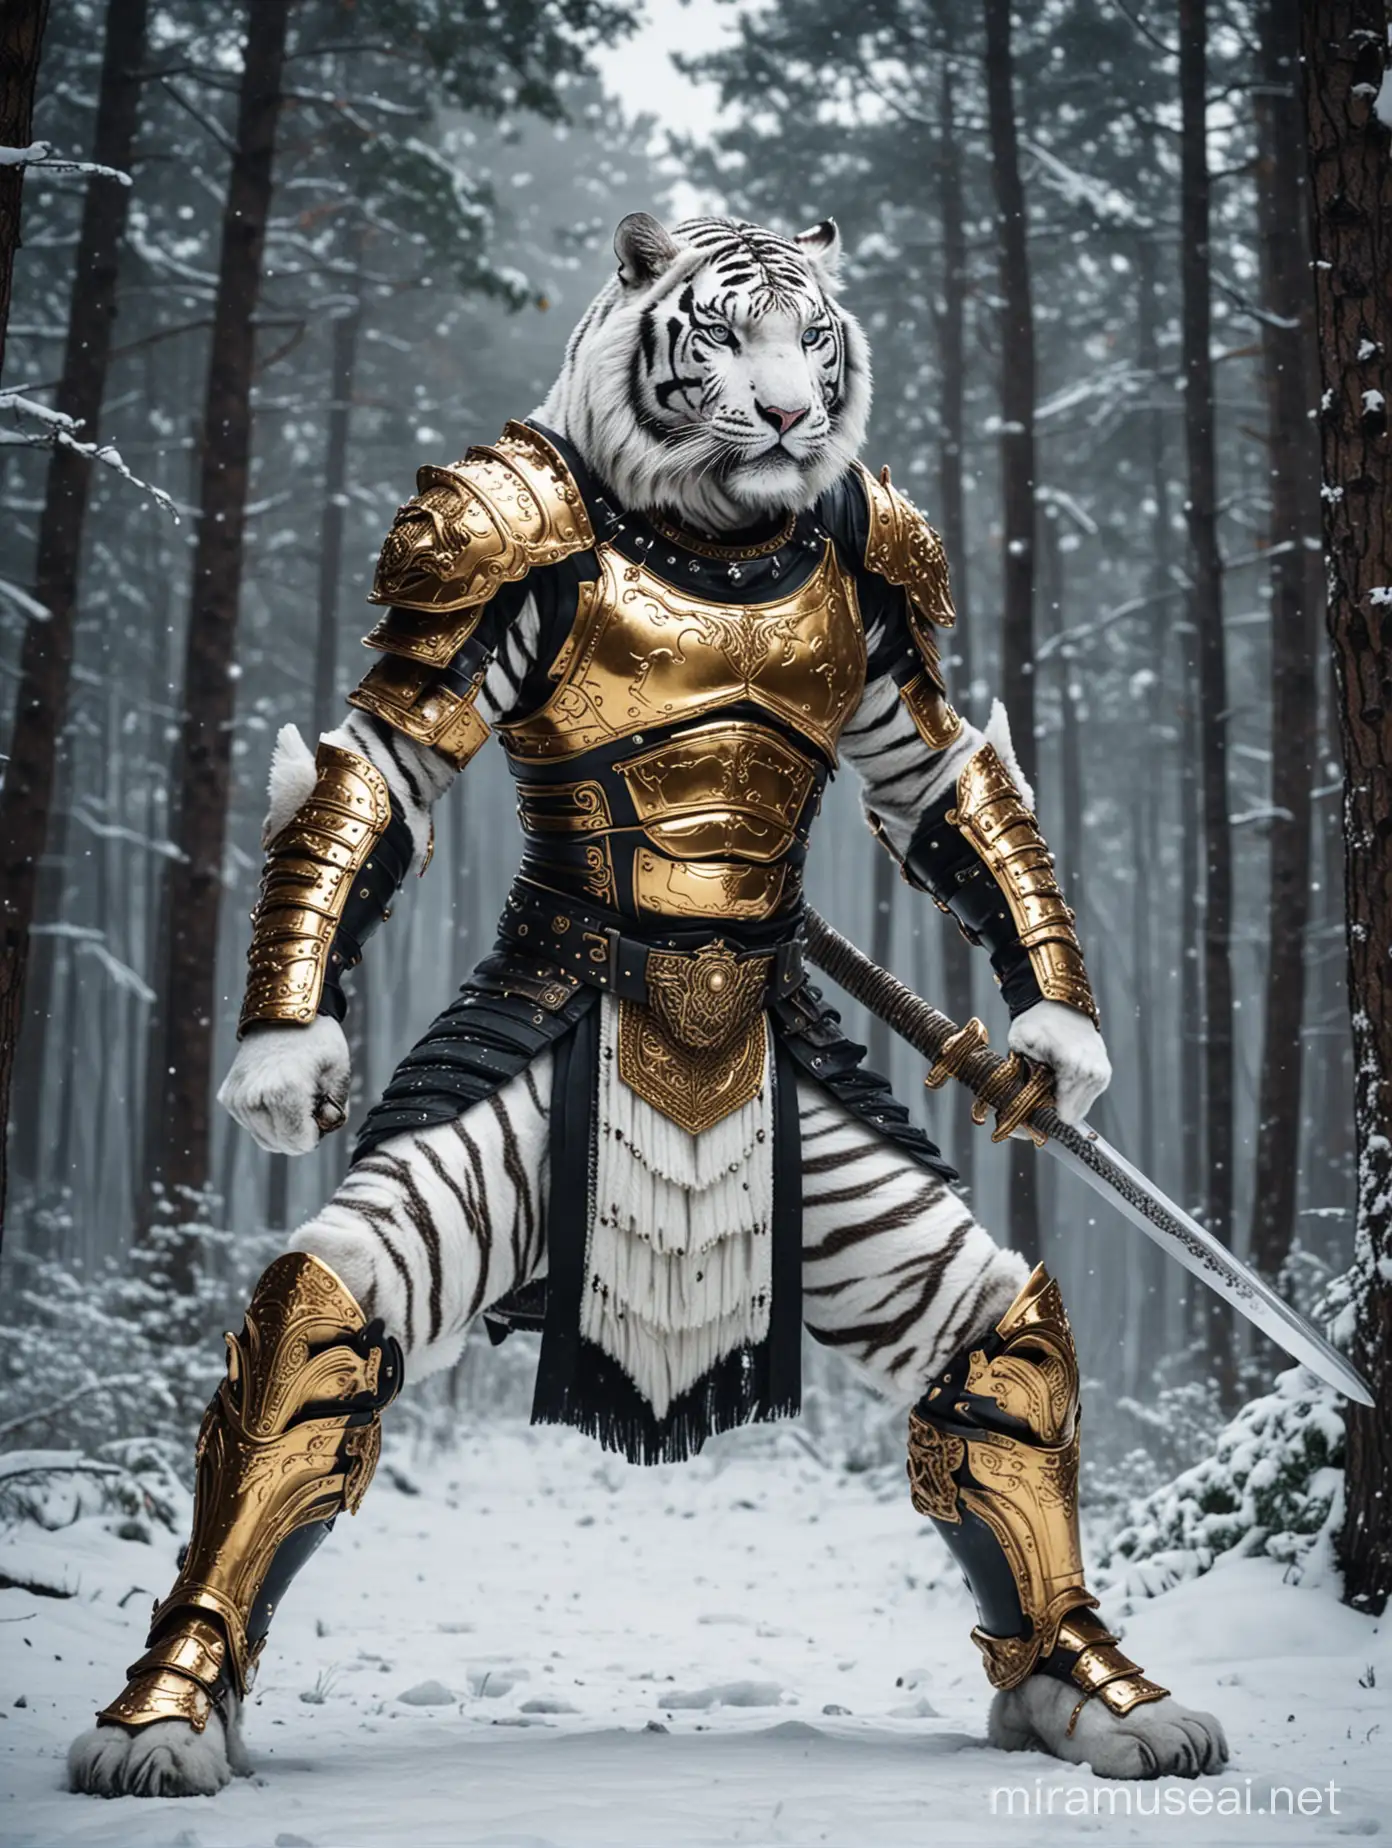 Siberian White Tiger Warrior in Golden King Armor Mastering Kung Fu Amidst Snowy Pines